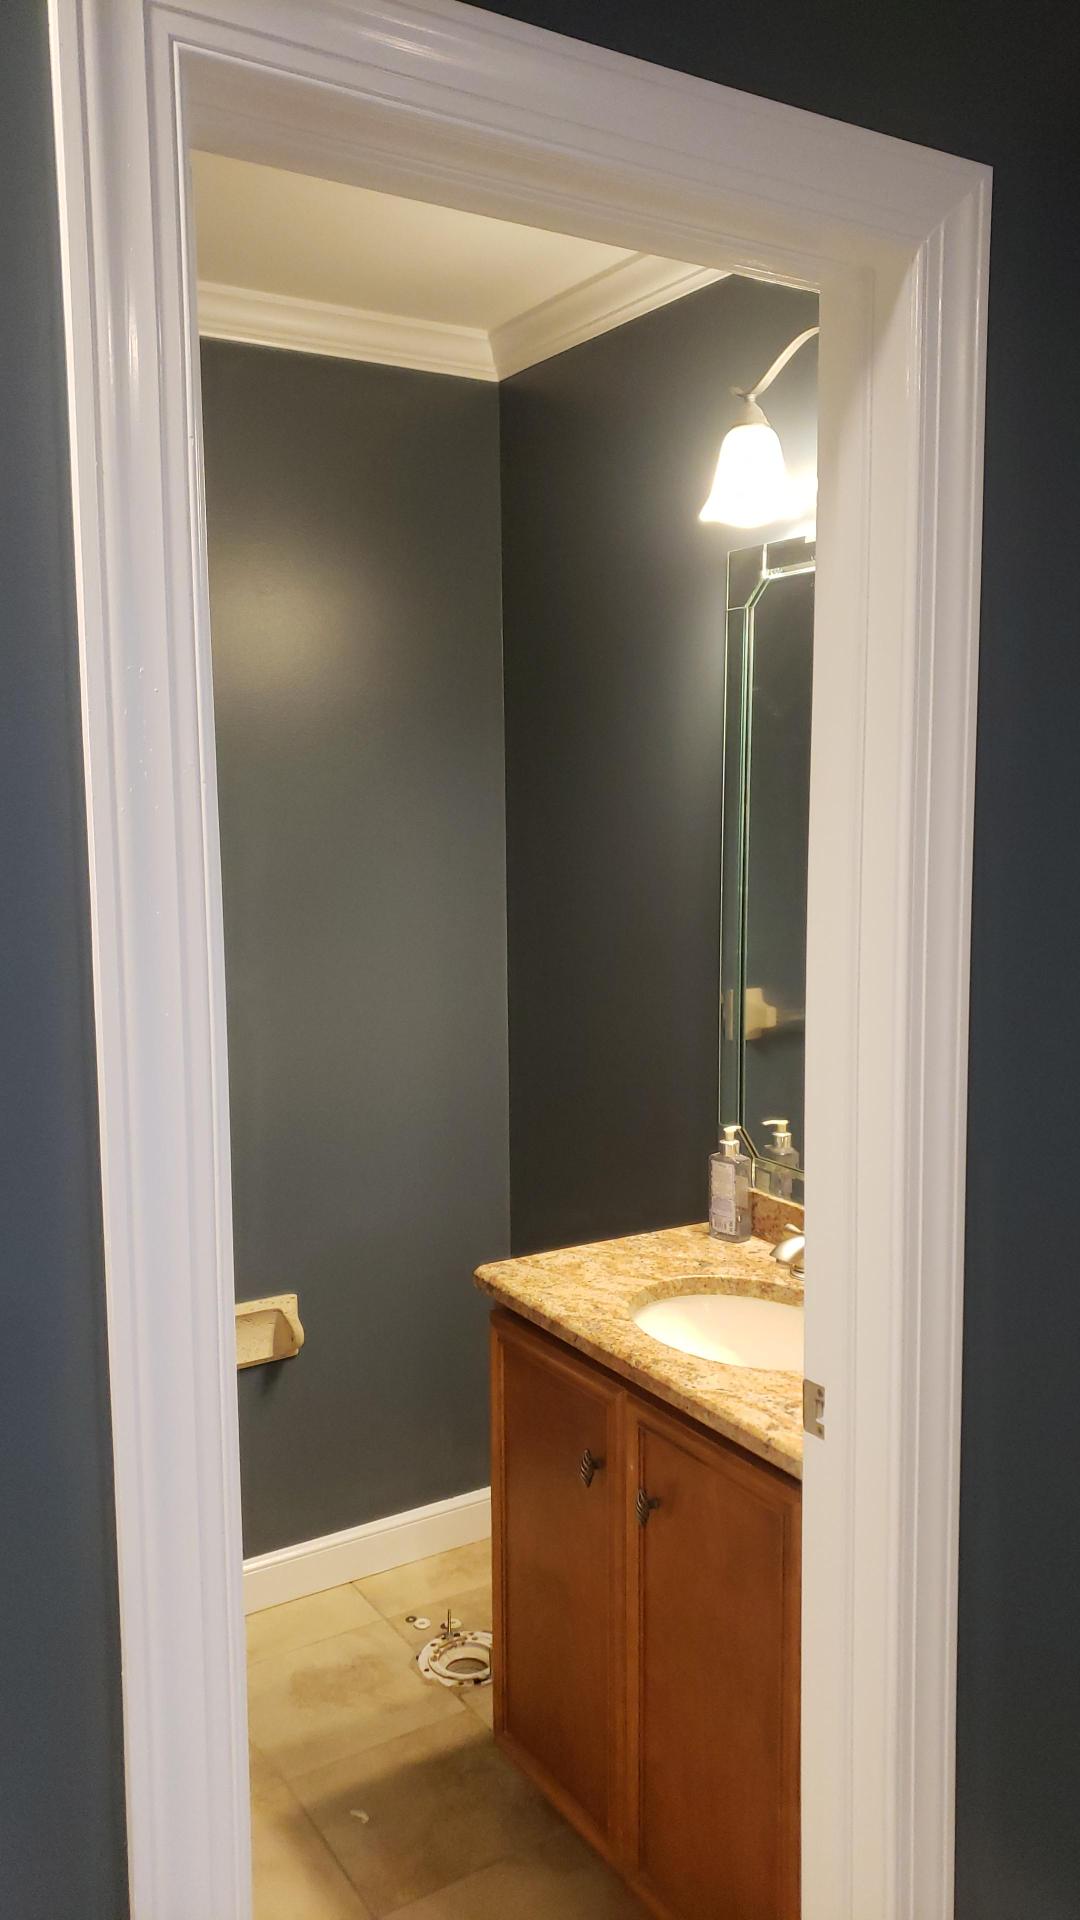 Bathroom in Easton, PA, before residential interior painting project by CertaPro Painters of the Greater Lehigh Valley